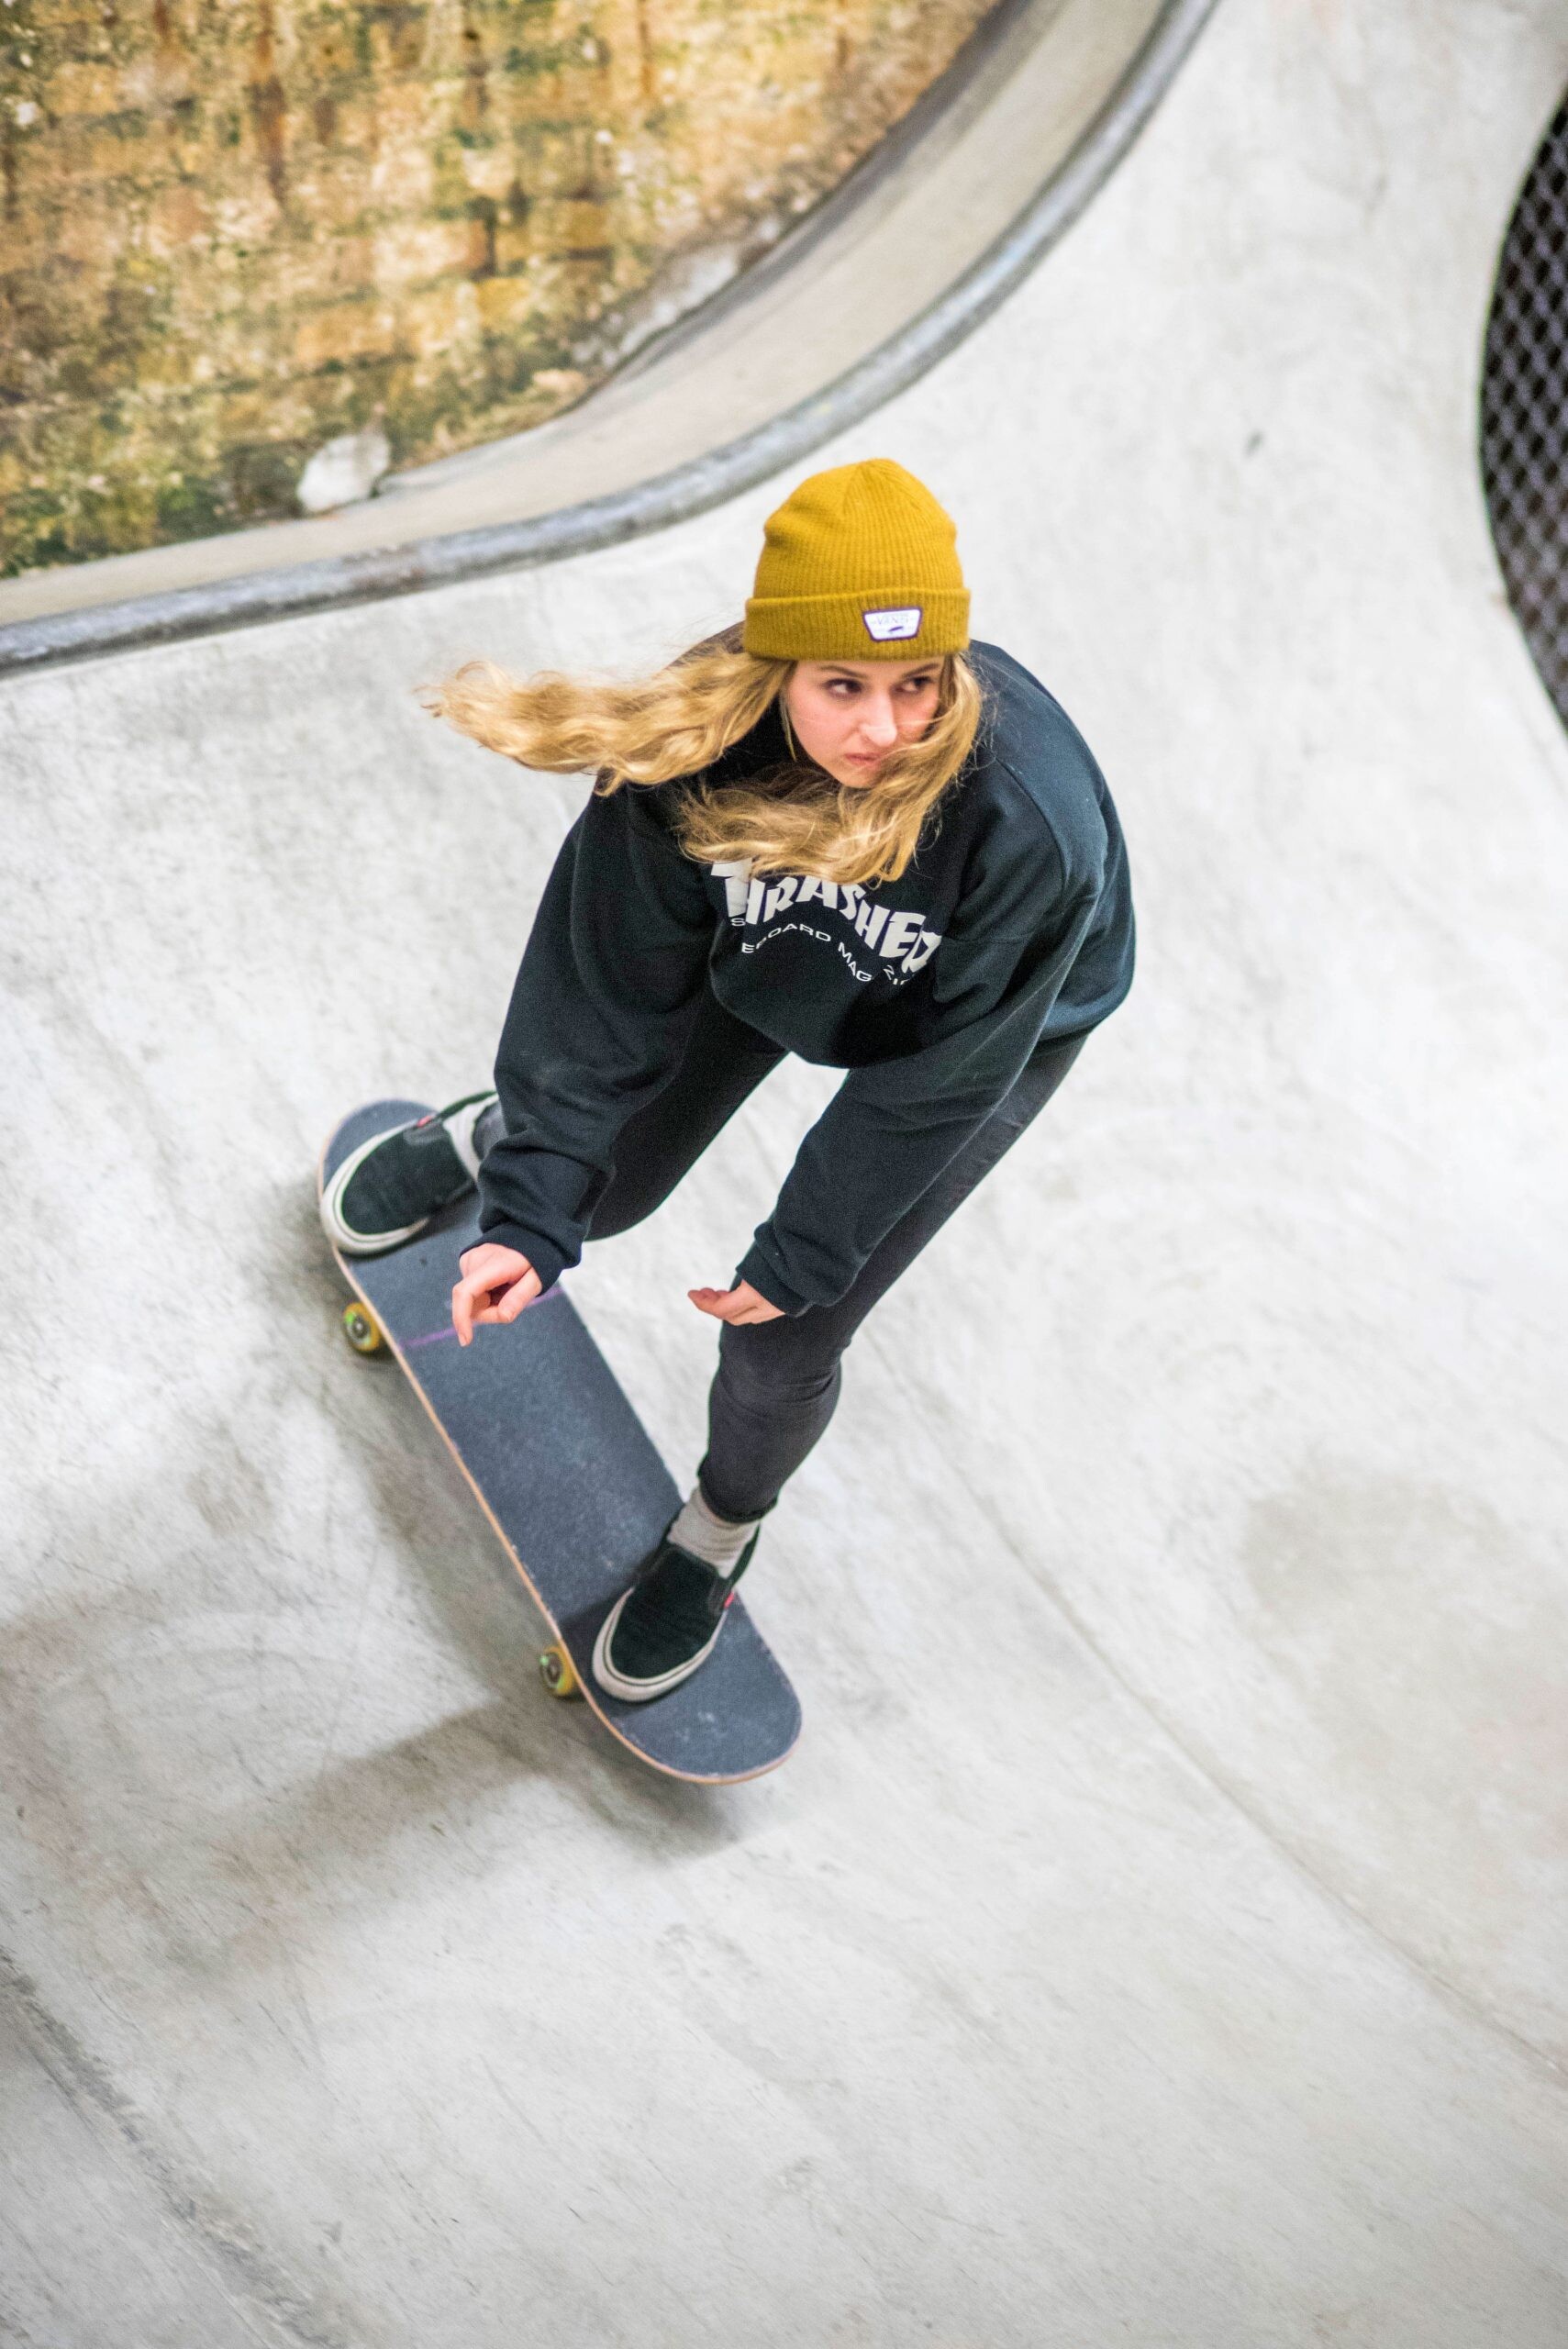 Girl Skateboarding: Skater, Riding in a designated skating area, Location for making tricks, Ramps. 1710x2560 HD Wallpaper.